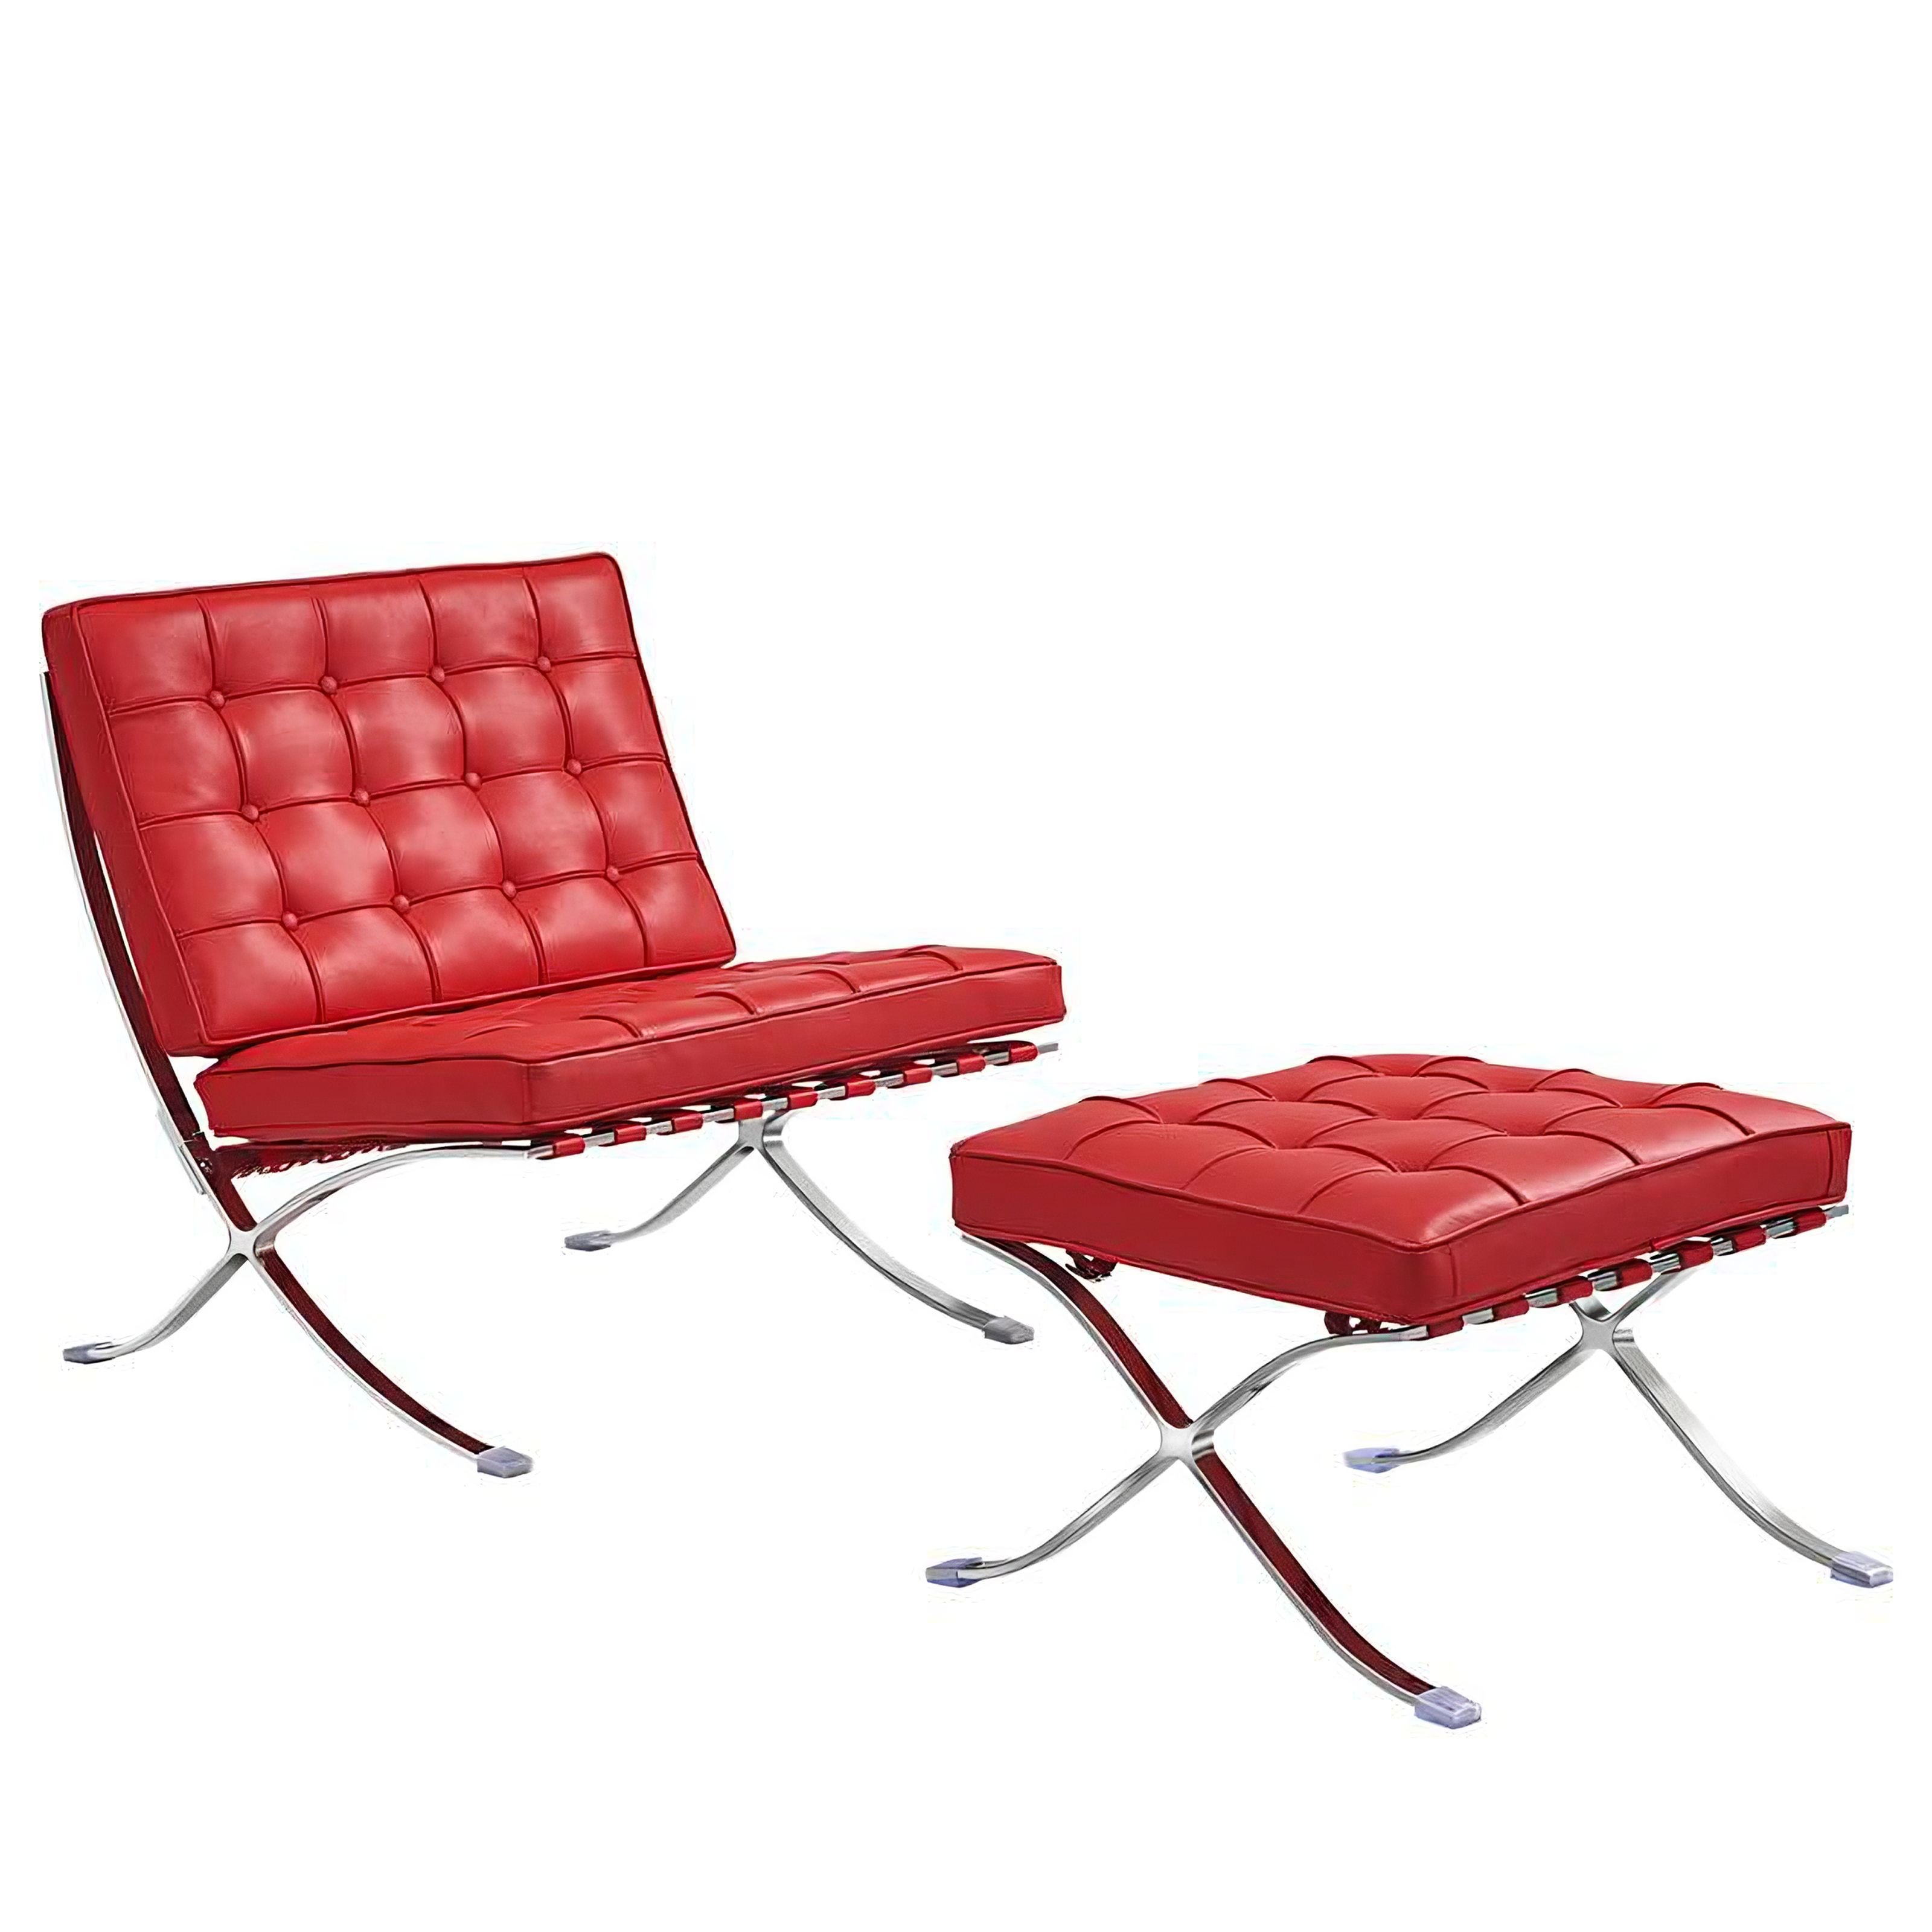 Ludwig Mies van der Rohe Barcelona Pavilion Chair and Ottoman, Full-Grain Leather and Steel